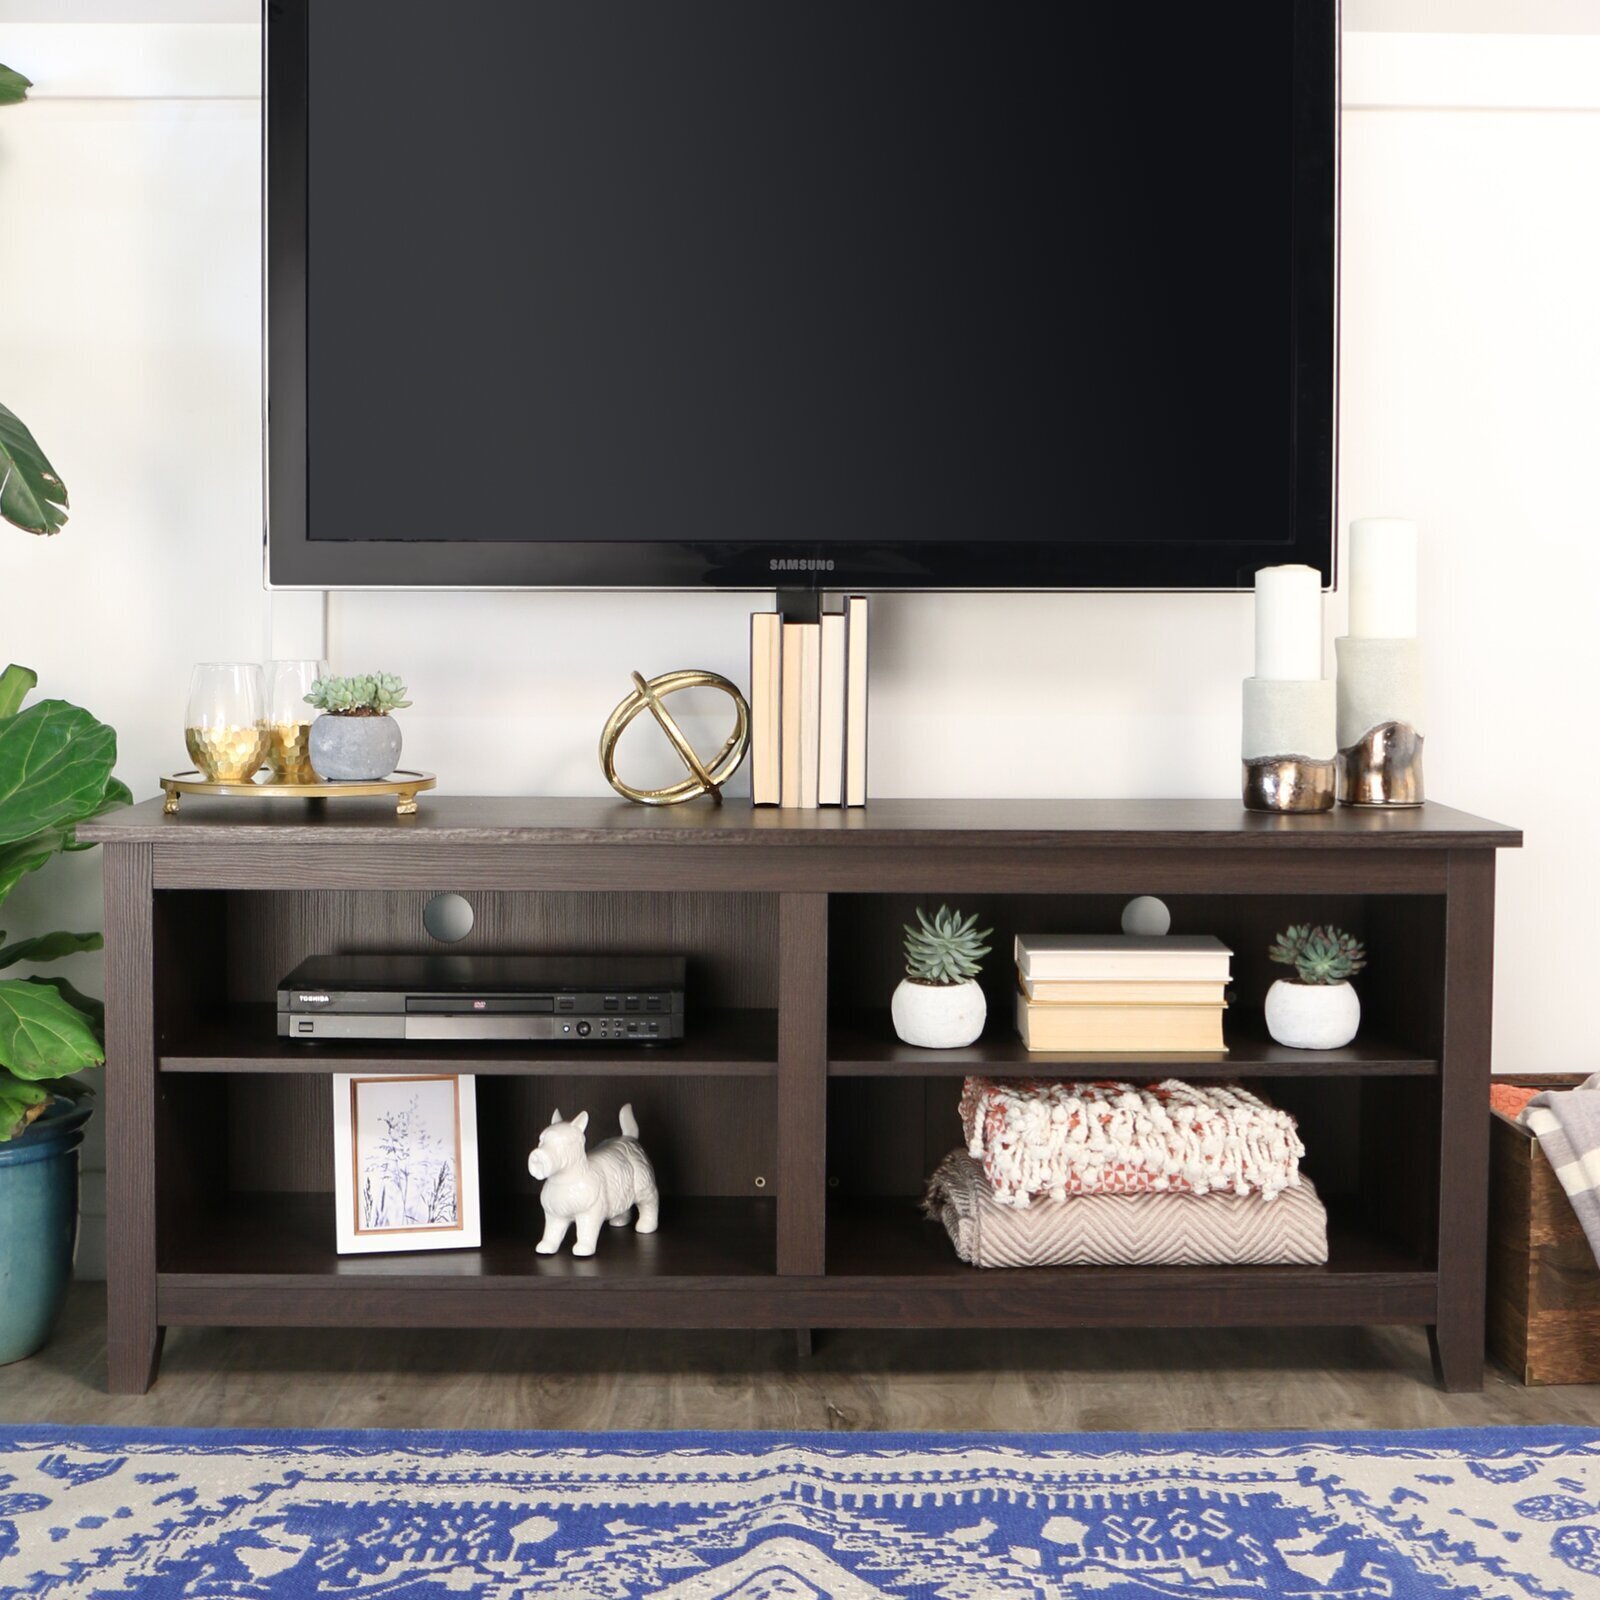 Rustic Tv Cabinet with Mount